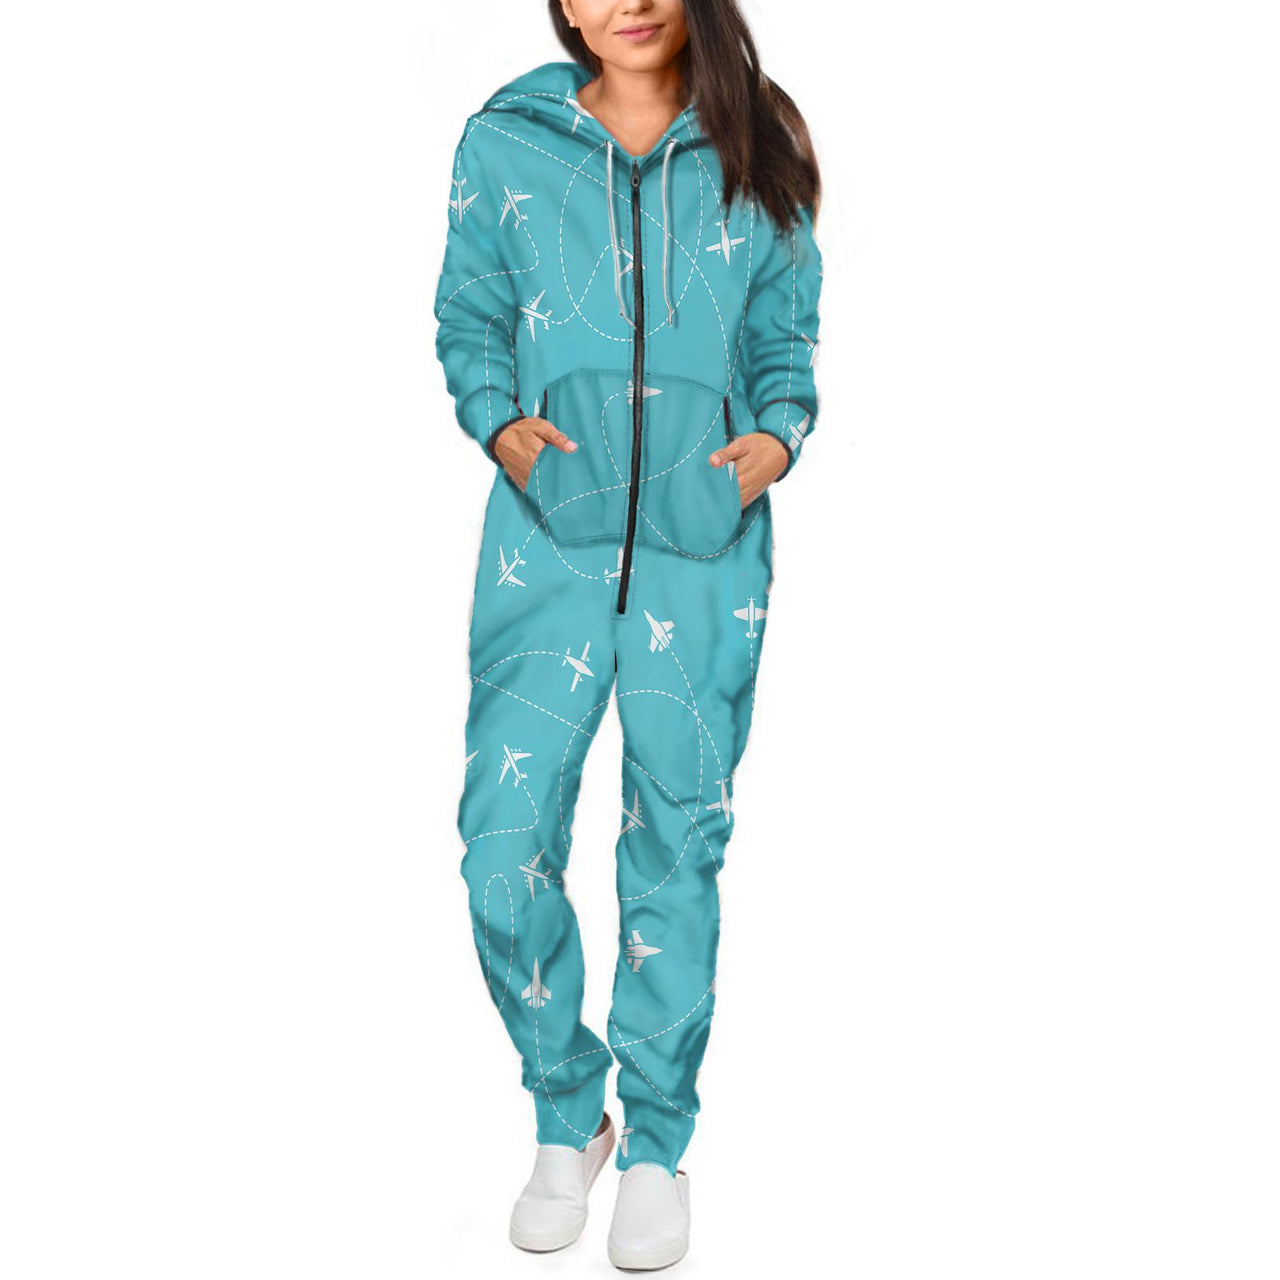 Travel The The World By Plane Designed Jumpsuit for Men & Women